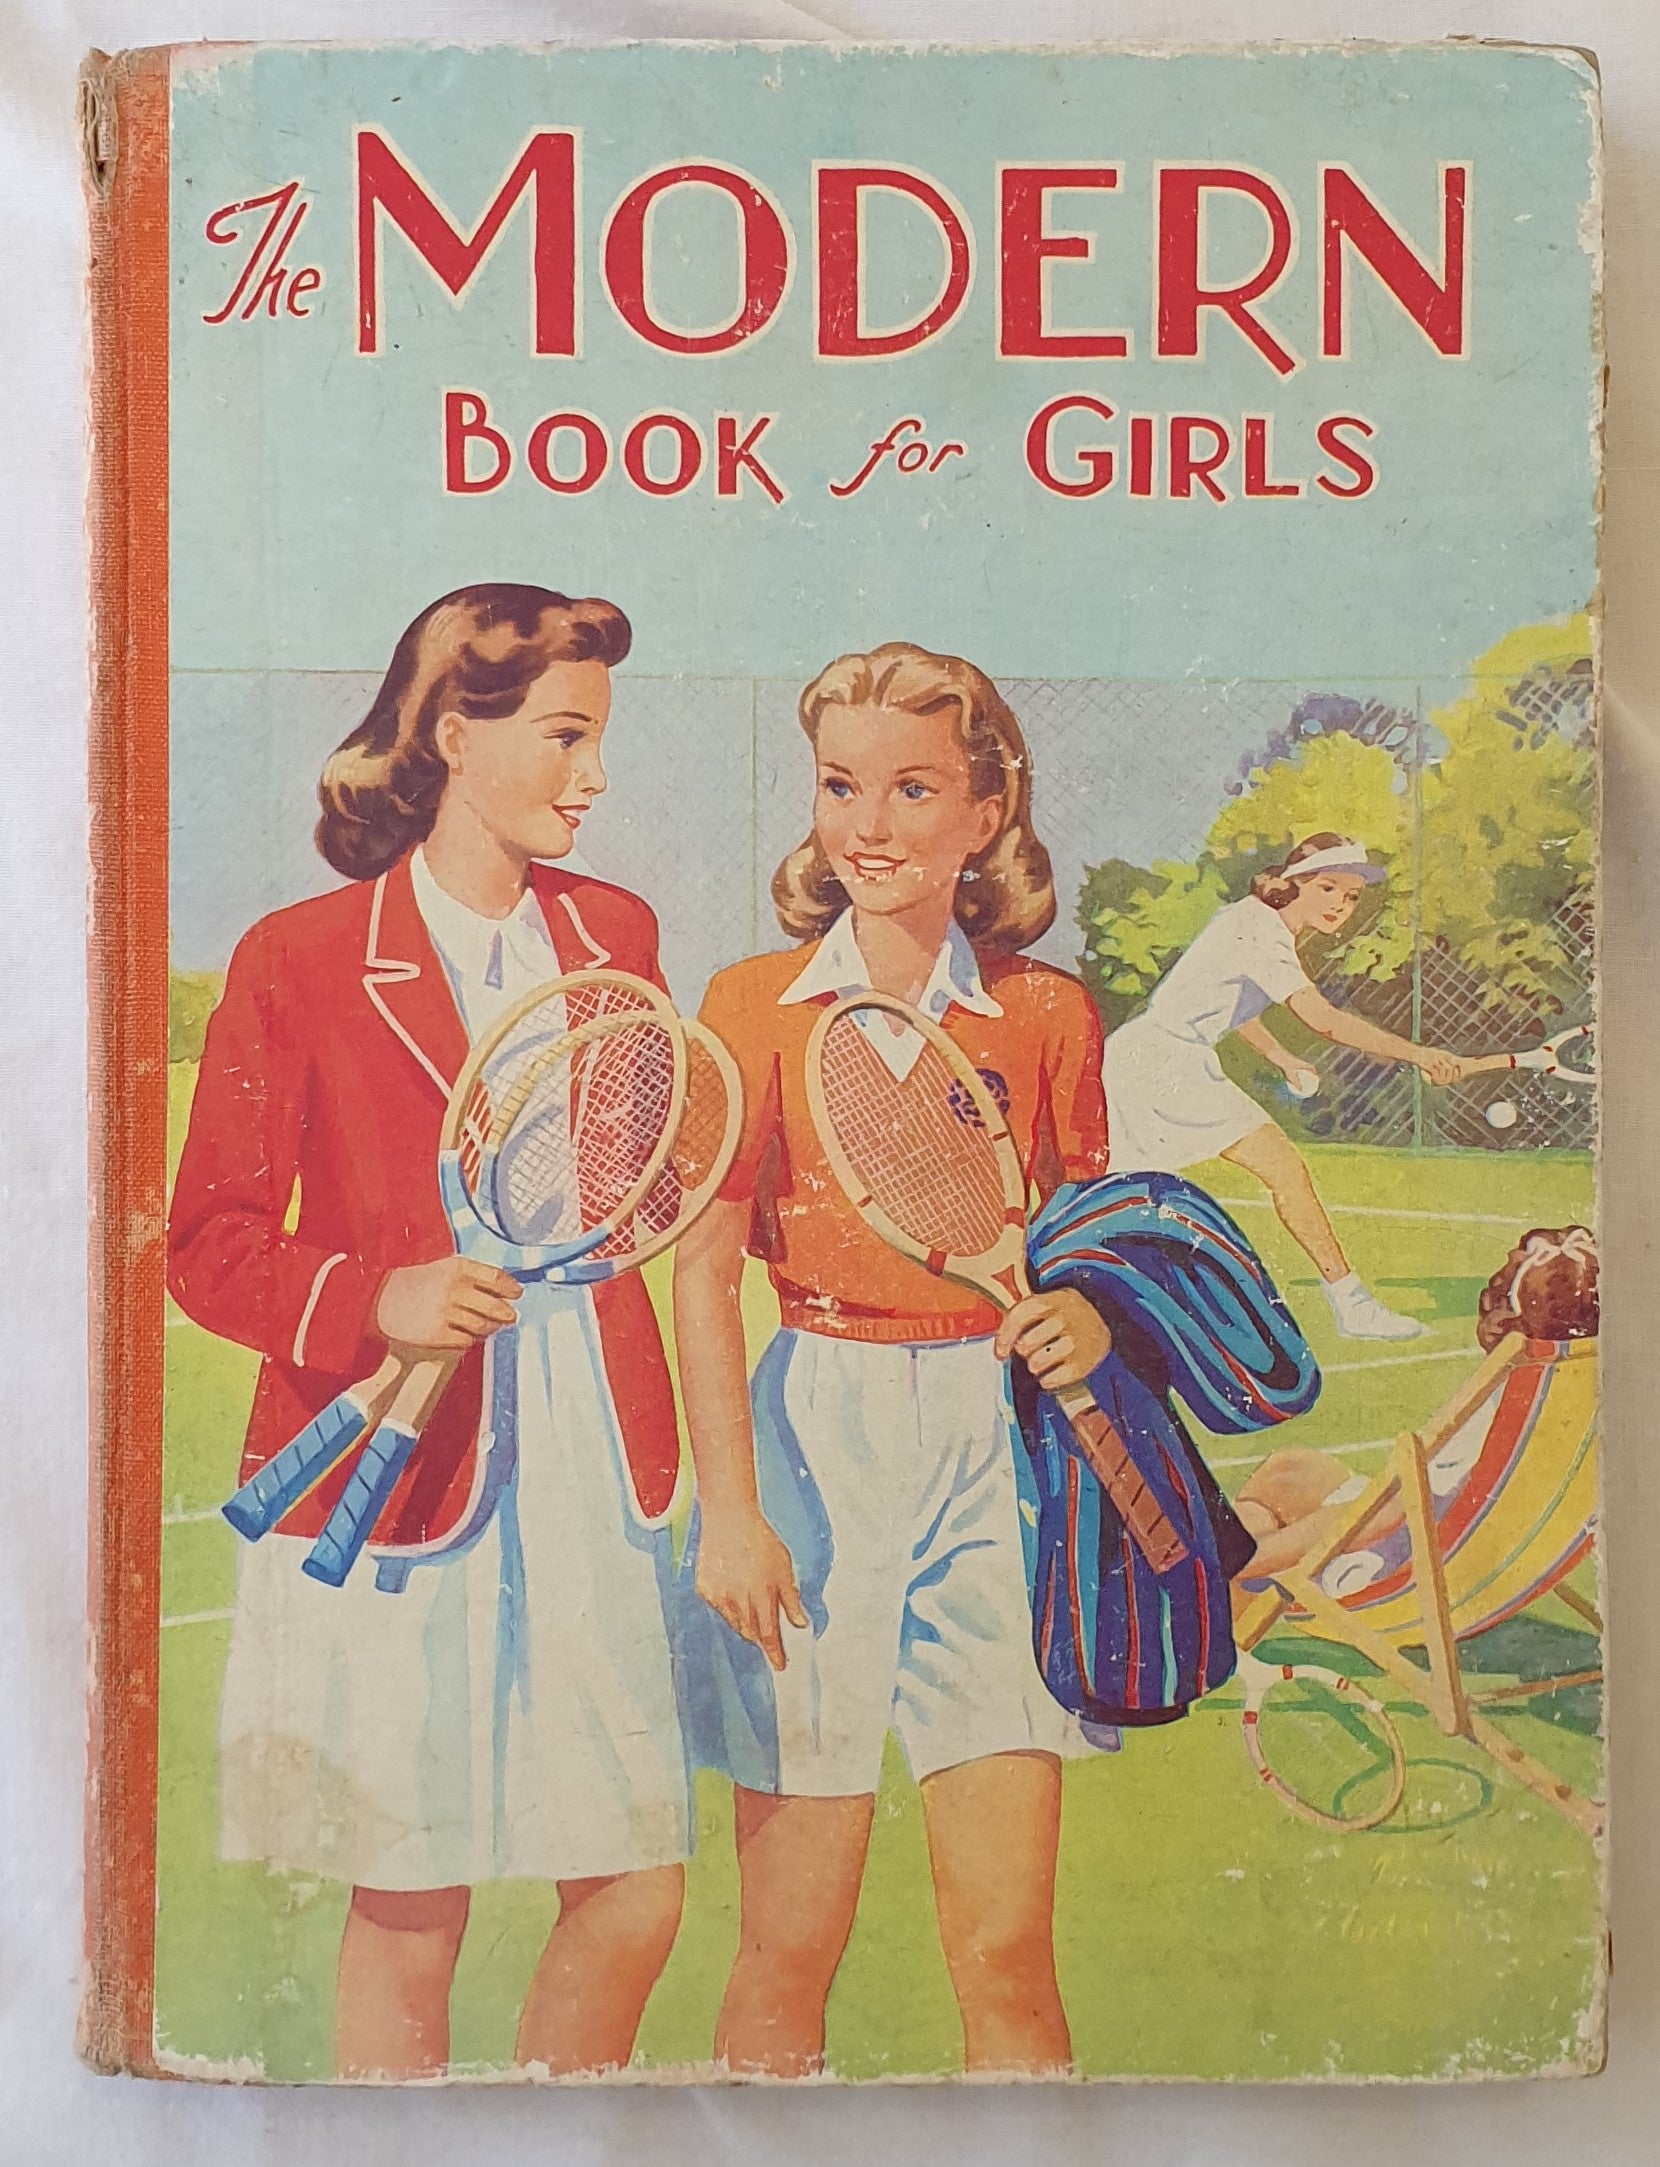 The Modern Book for Girls